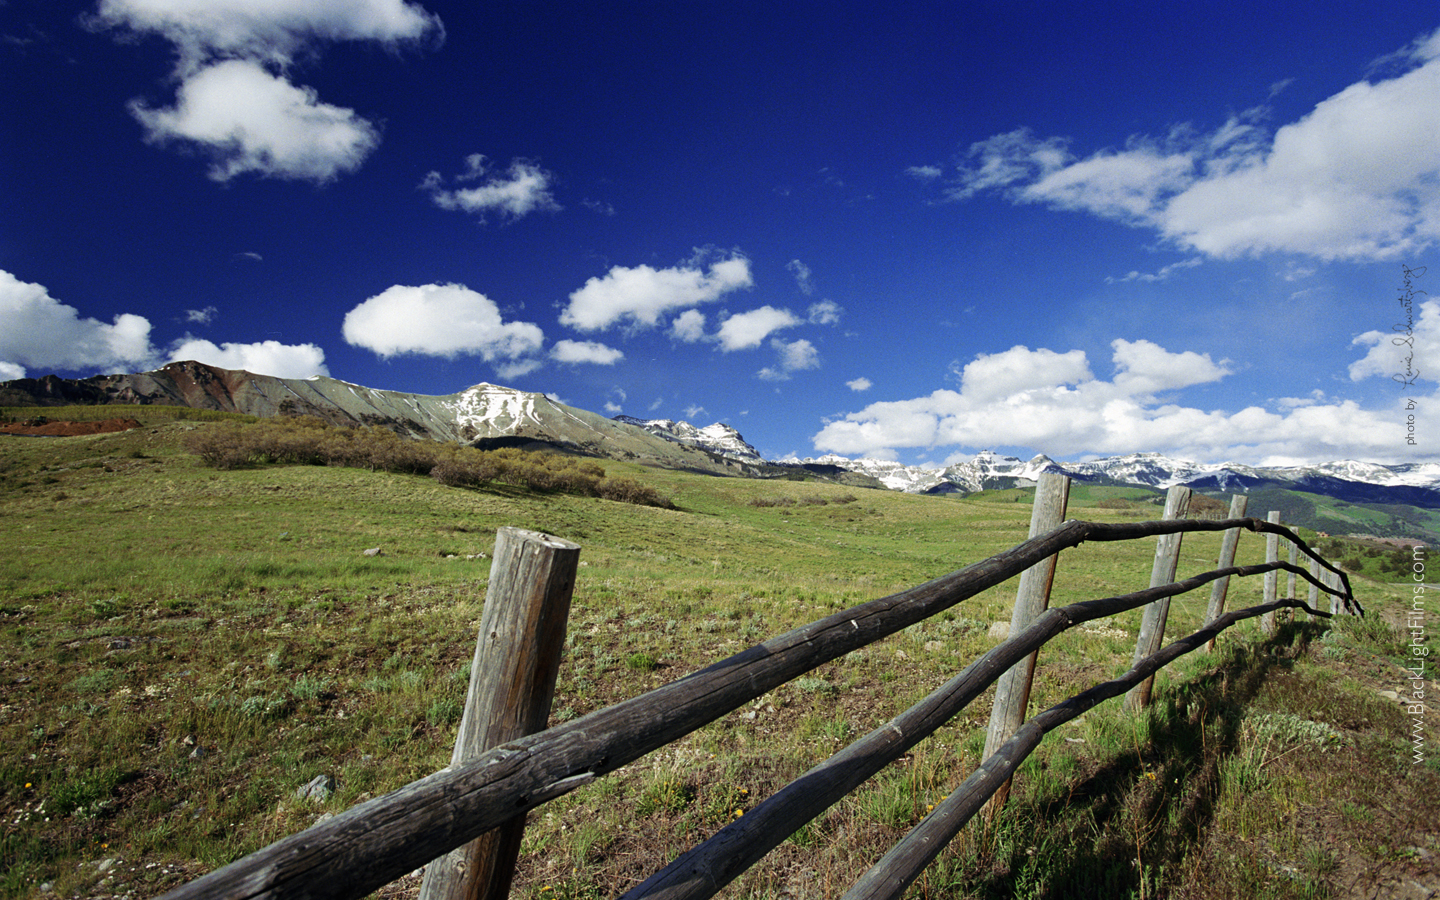 man made, fence, landscape, mountain